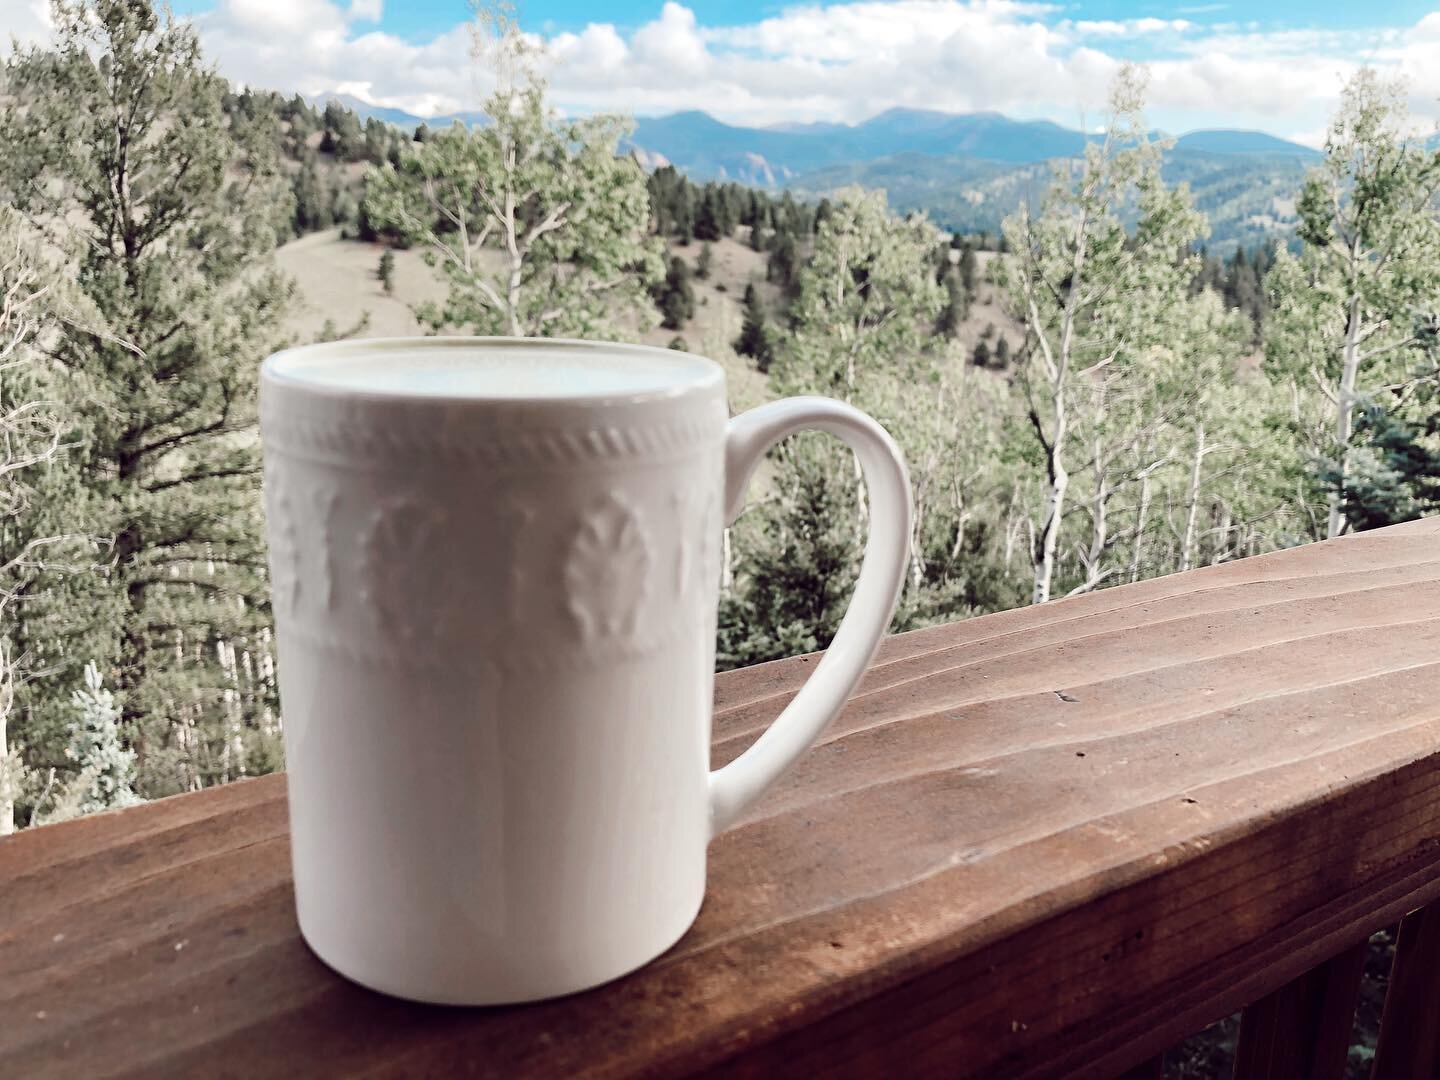 Where are you having your morning cuppa today? 
&bull;
&bull;
&bull;
#coloradoairbnb #coffeetime #mountains #scenery #cuppacoffee #cuppatea #coffee #coloradovrbo #coffeewithaview #porchlife #morning #colorado #victorcolorado #cabinlife #cabinlove